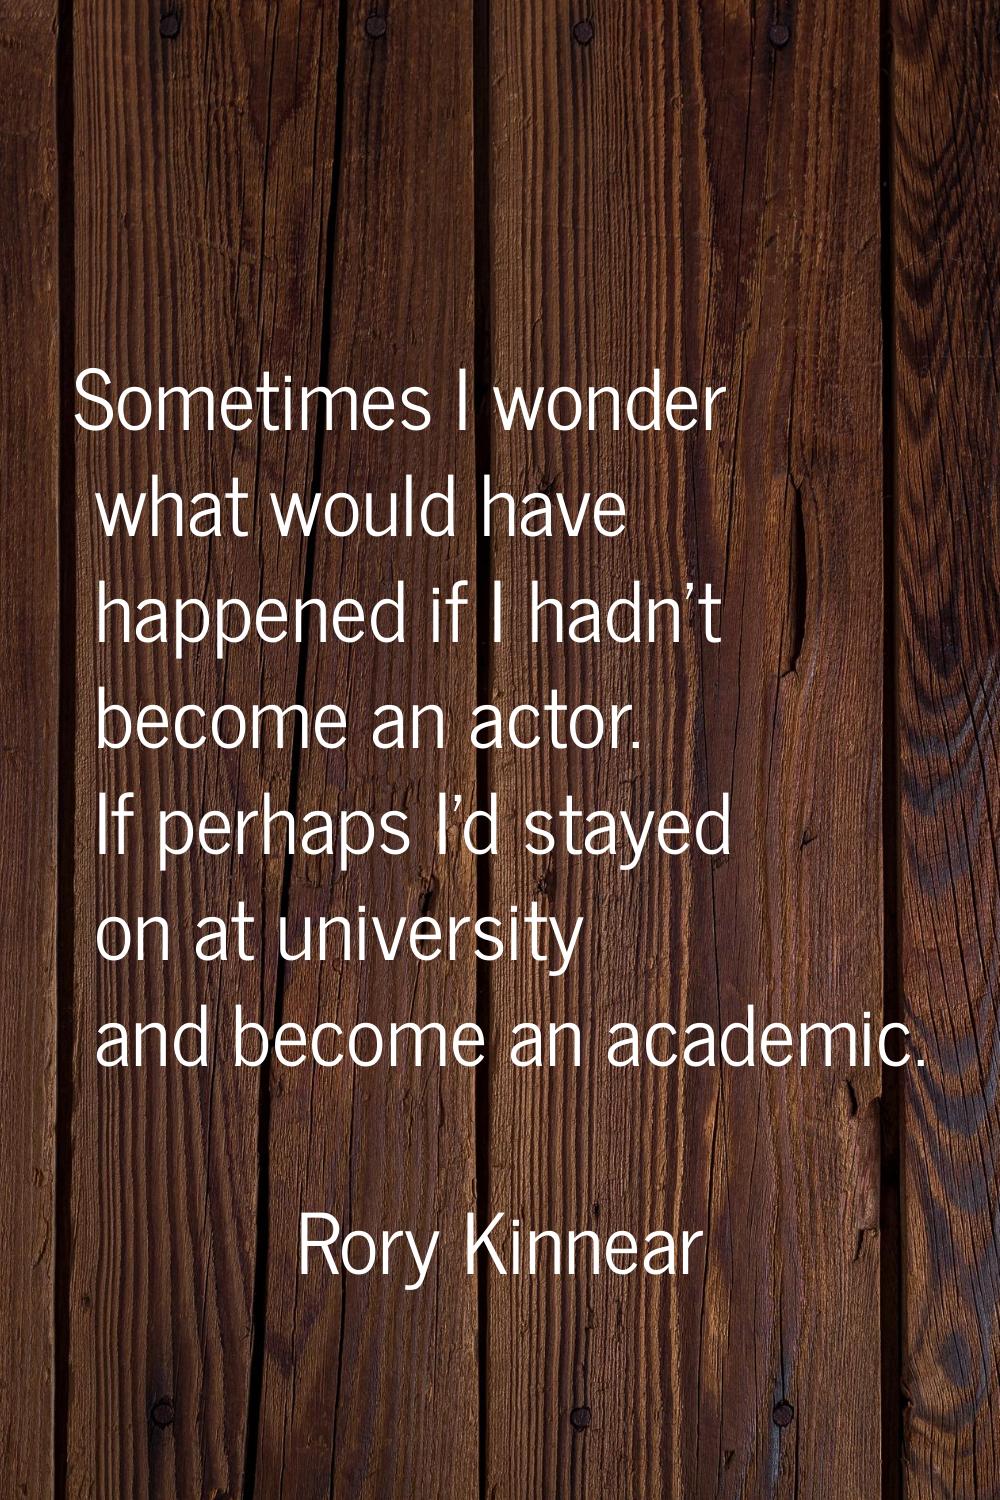 Sometimes I wonder what would have happened if I hadn't become an actor. If perhaps I'd stayed on a